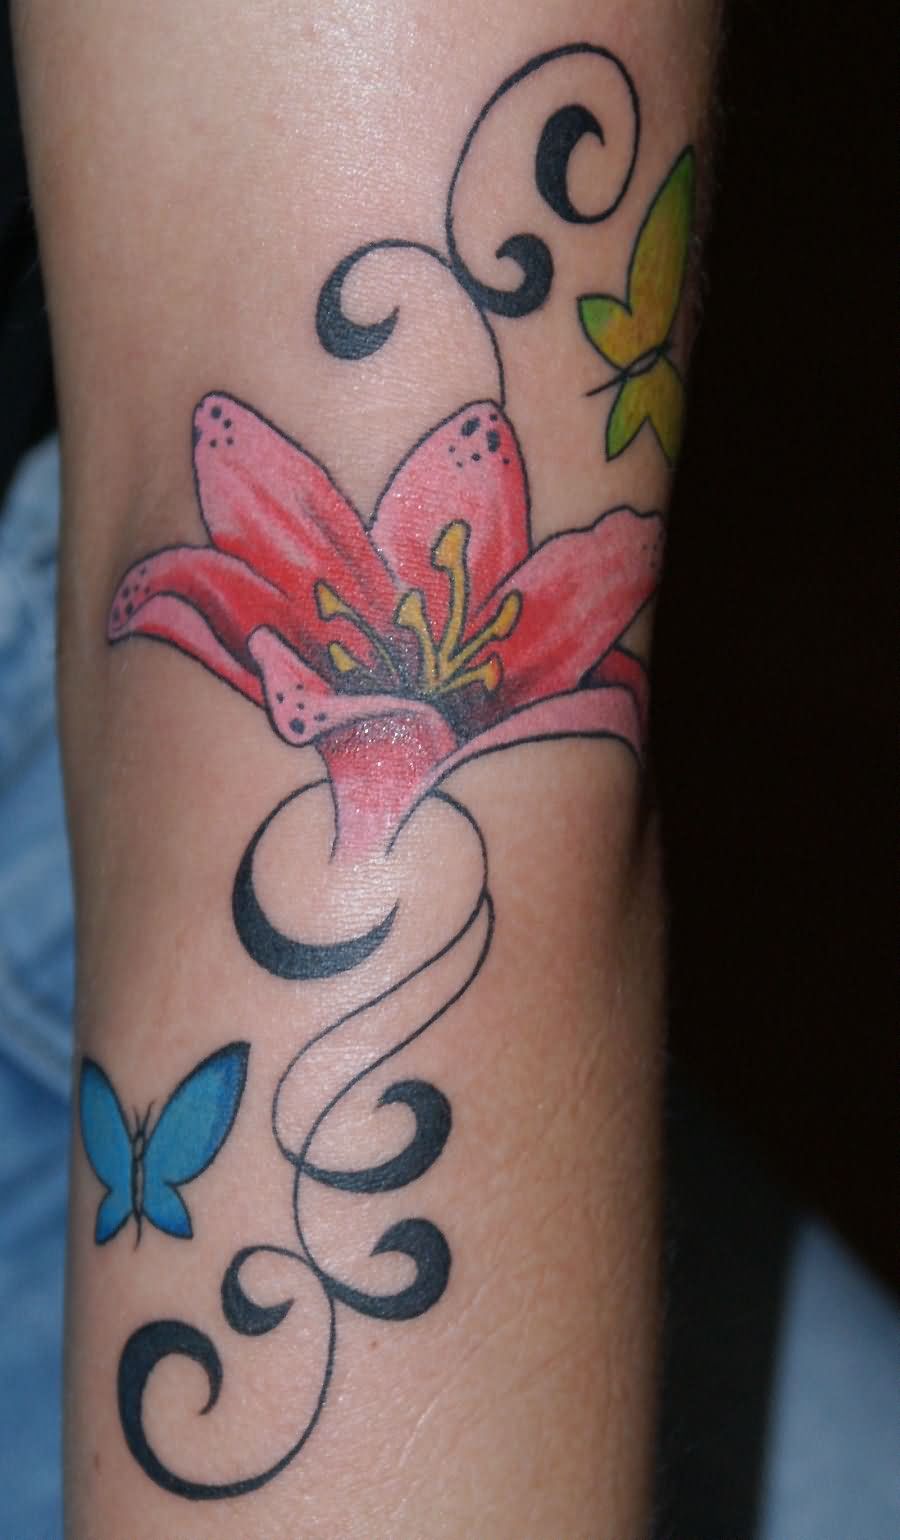 Cool Lily Flower Tattoo Design For Arm